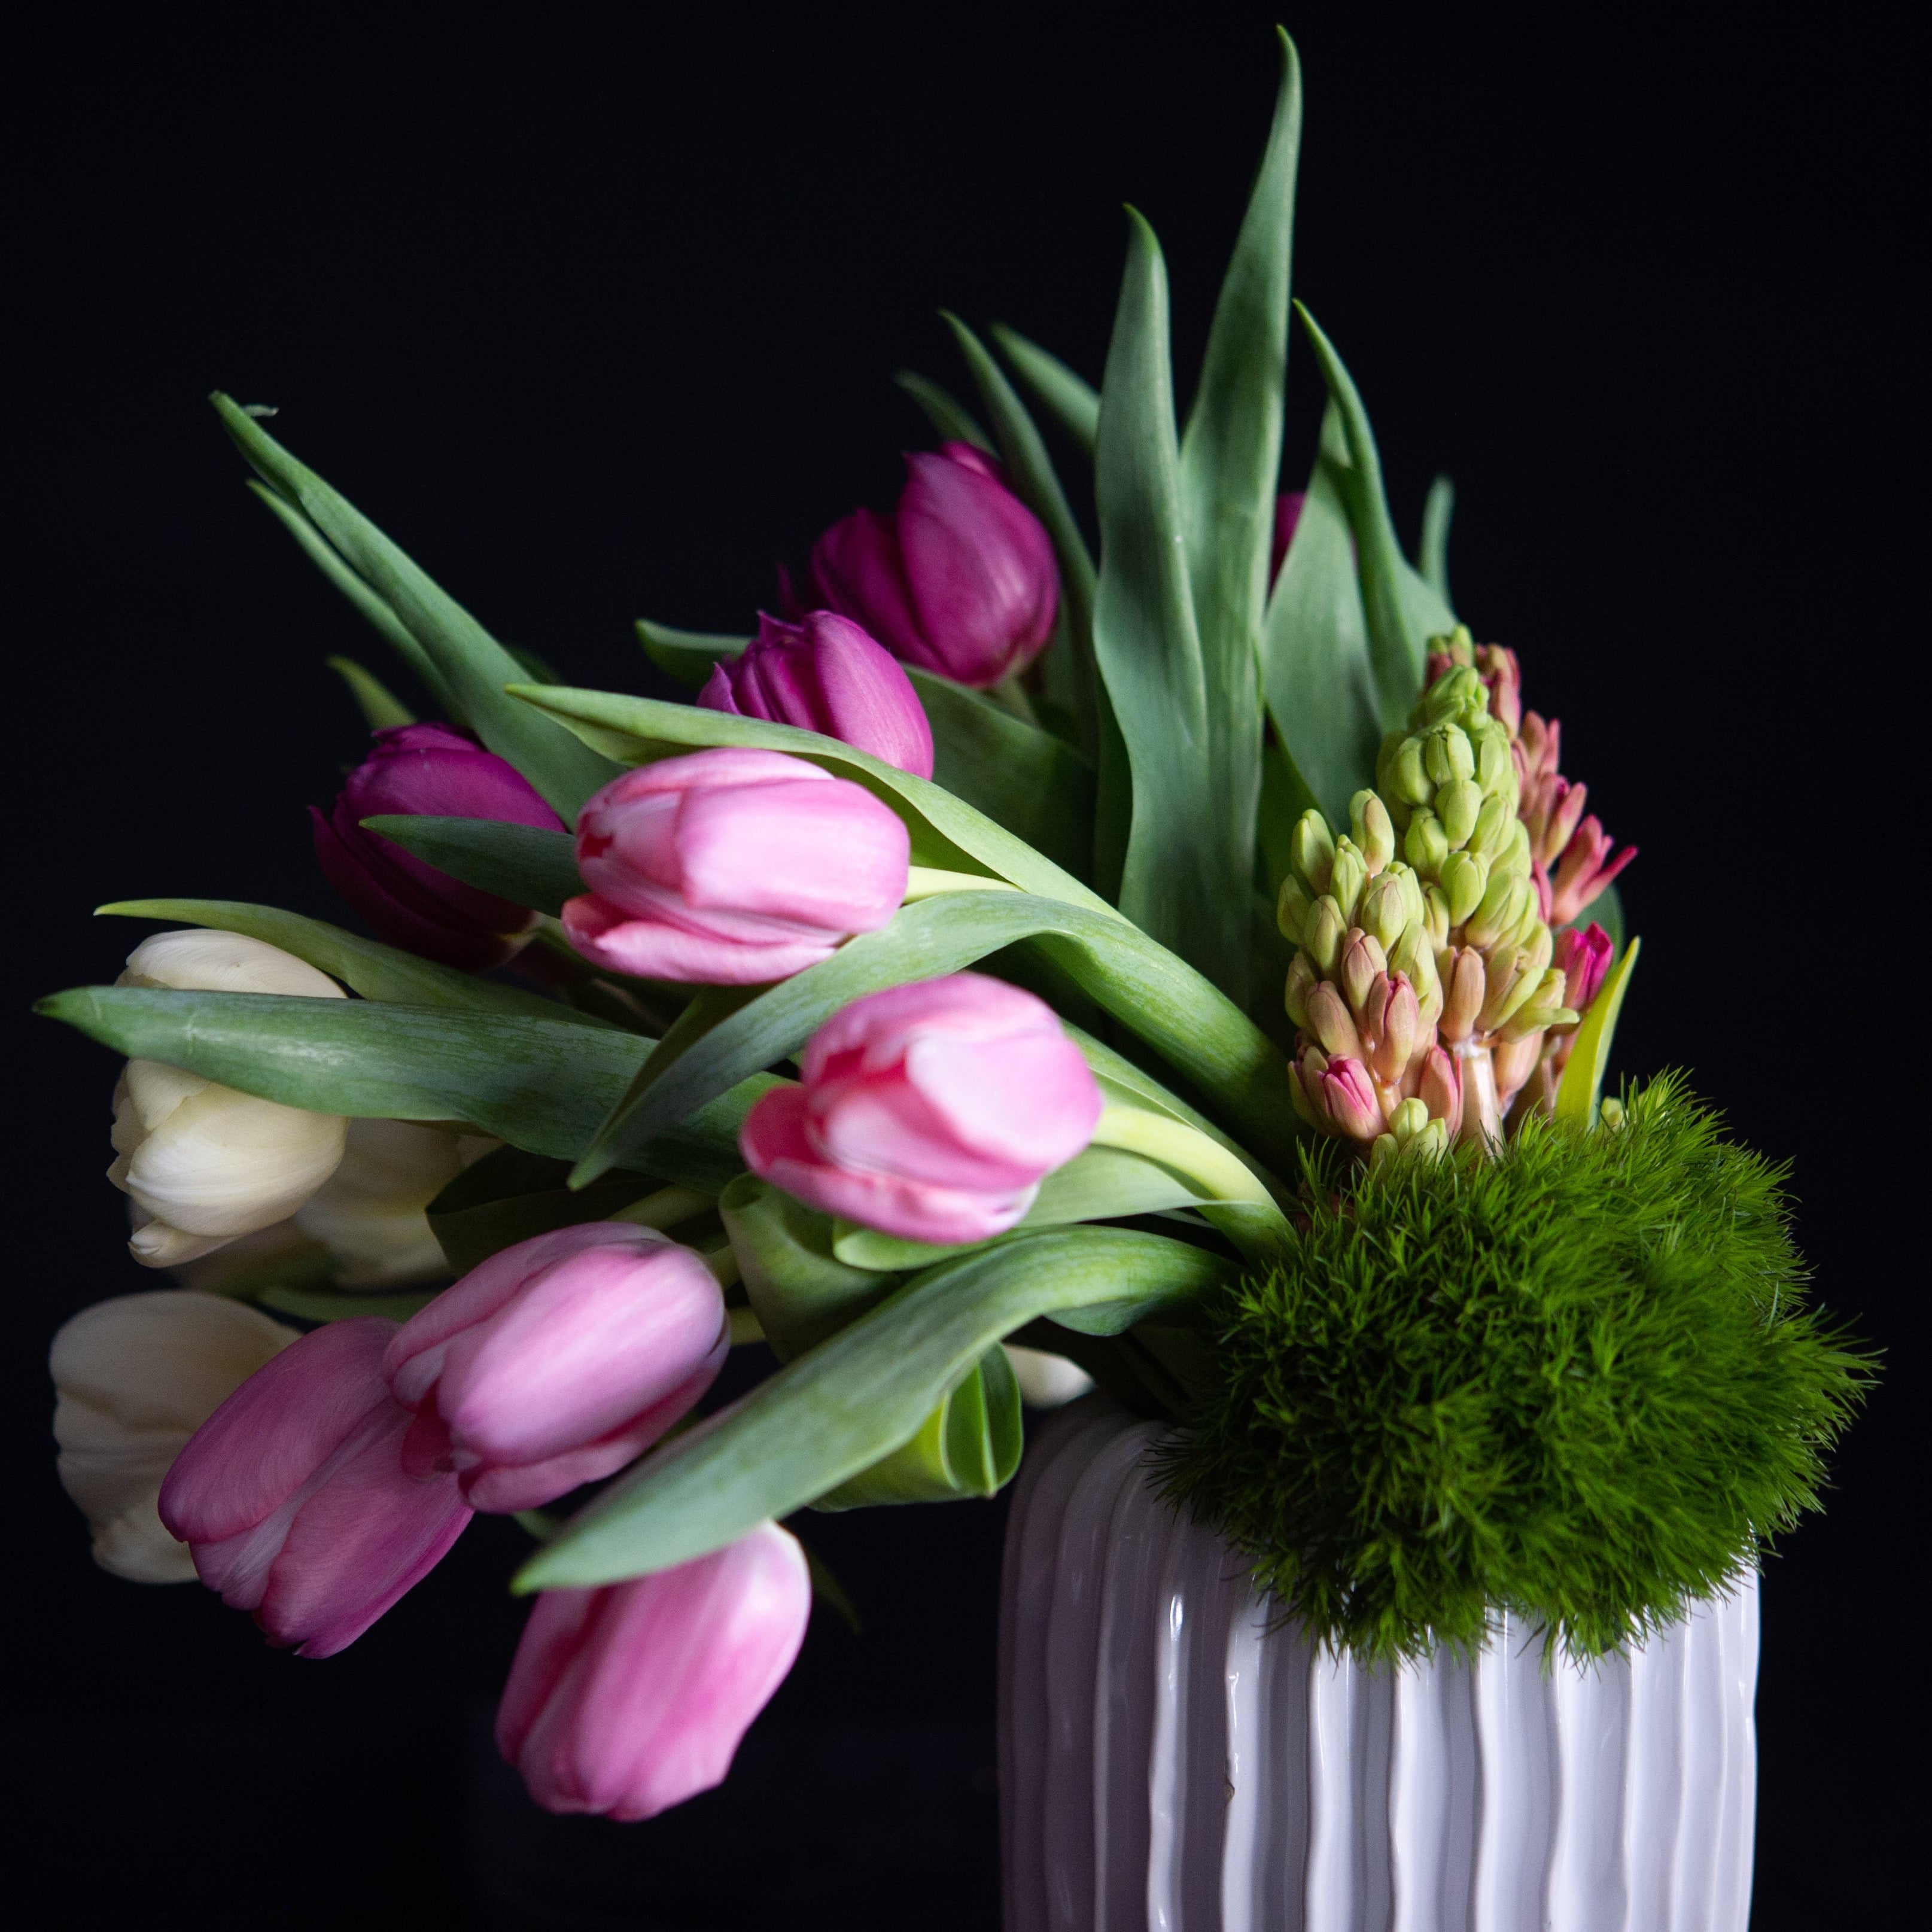 Mother's Day floral arrangement of tulips and hyacinth in pastel colors. In a white ceramic vase